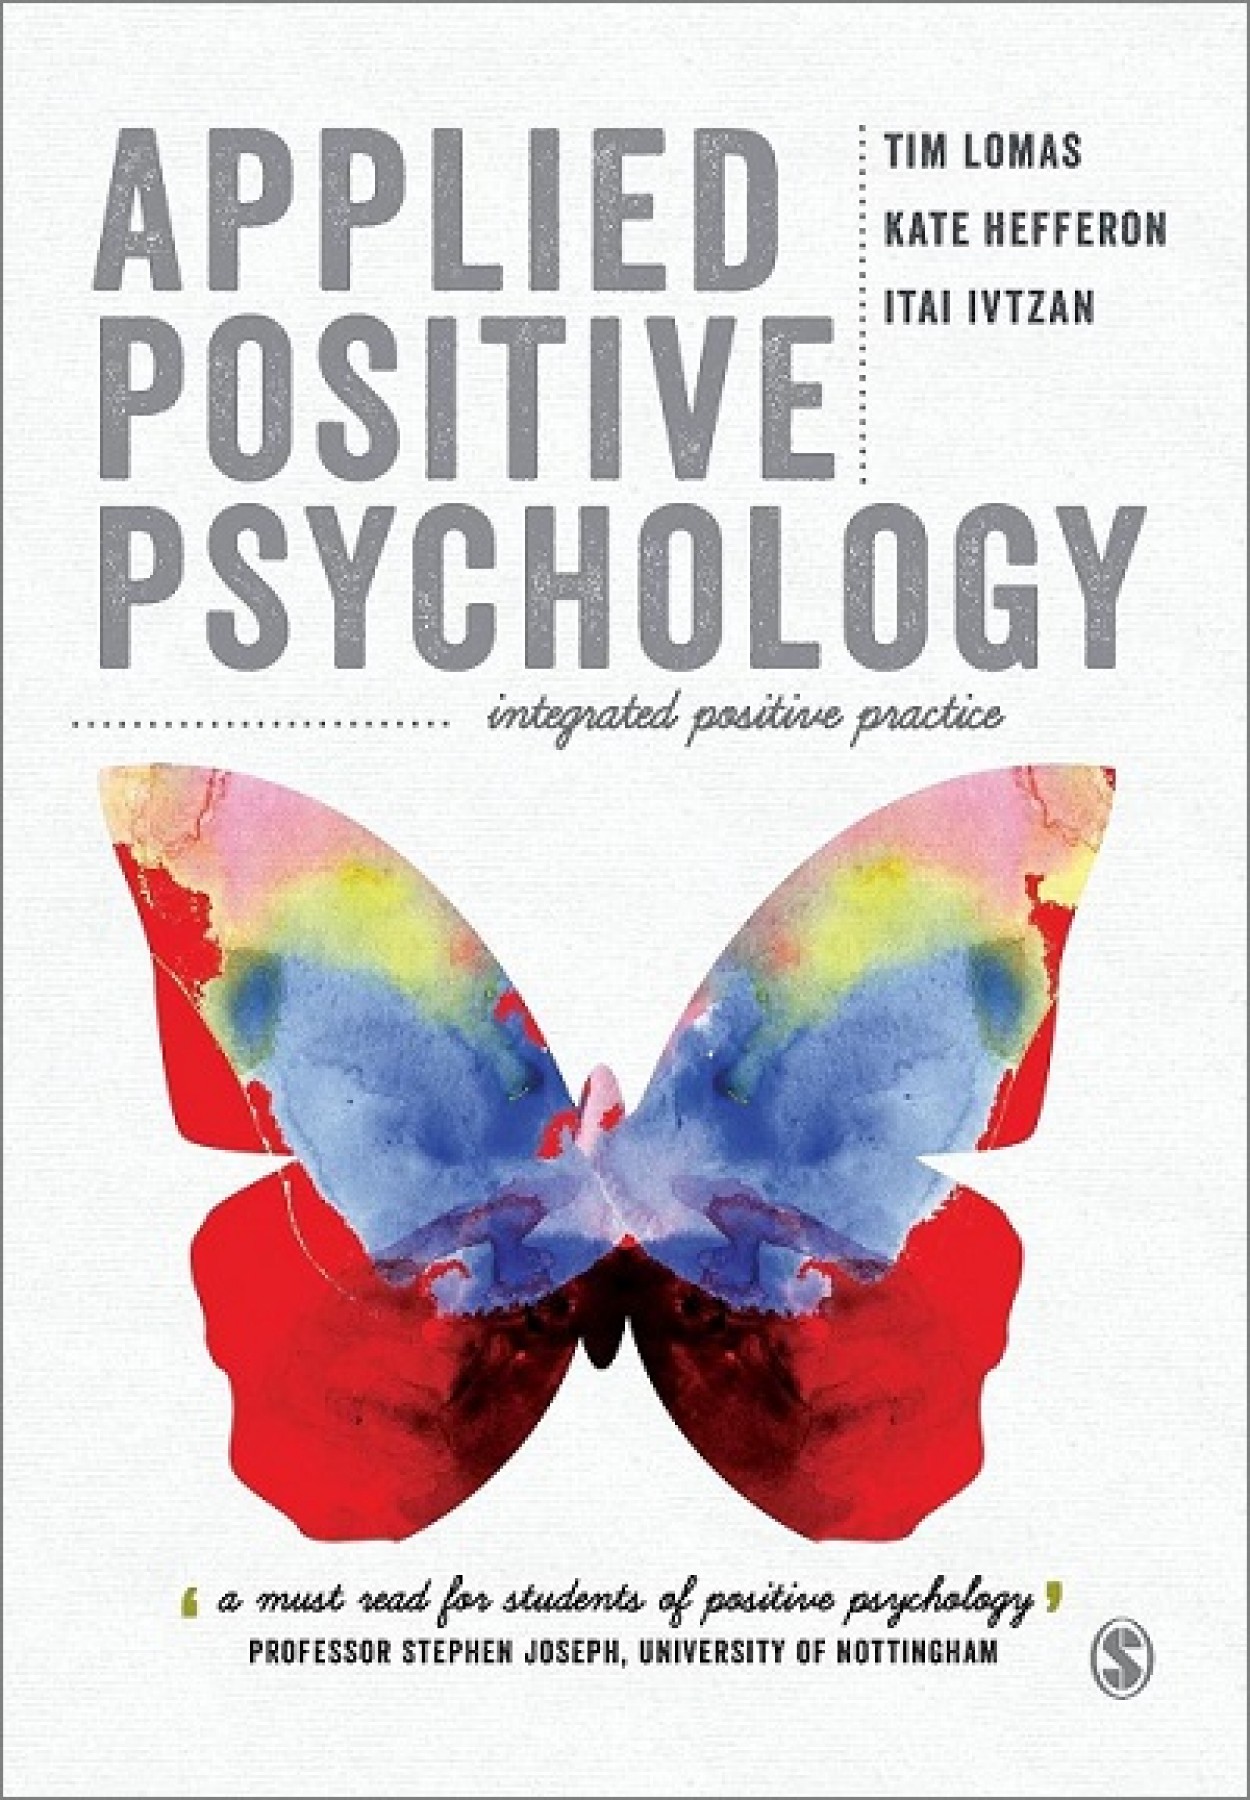 Applied positive psychology: Integrated positive practice